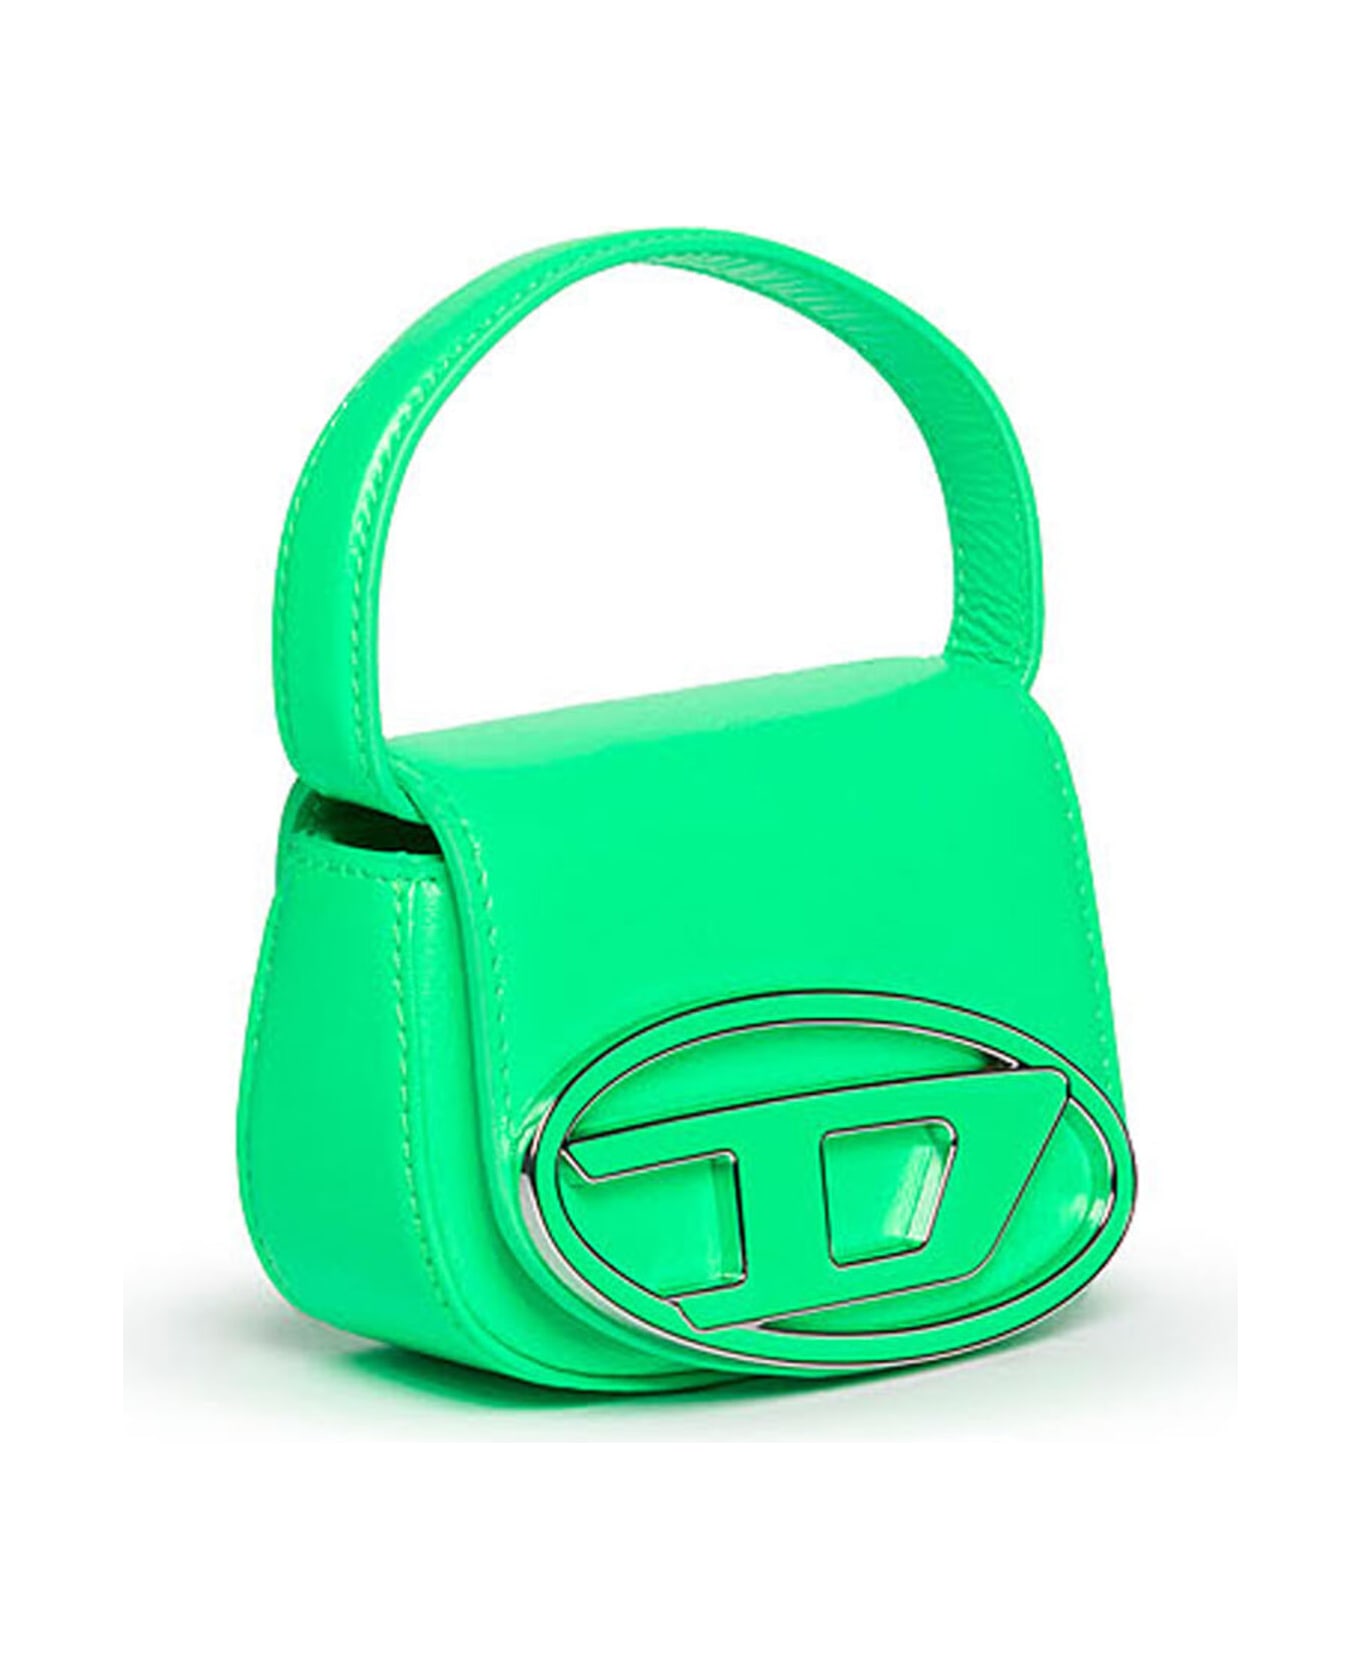 Diesel 1dr Xs Bags Diesel 1dr Xs Bag In Fluo Imitation Leather - Green